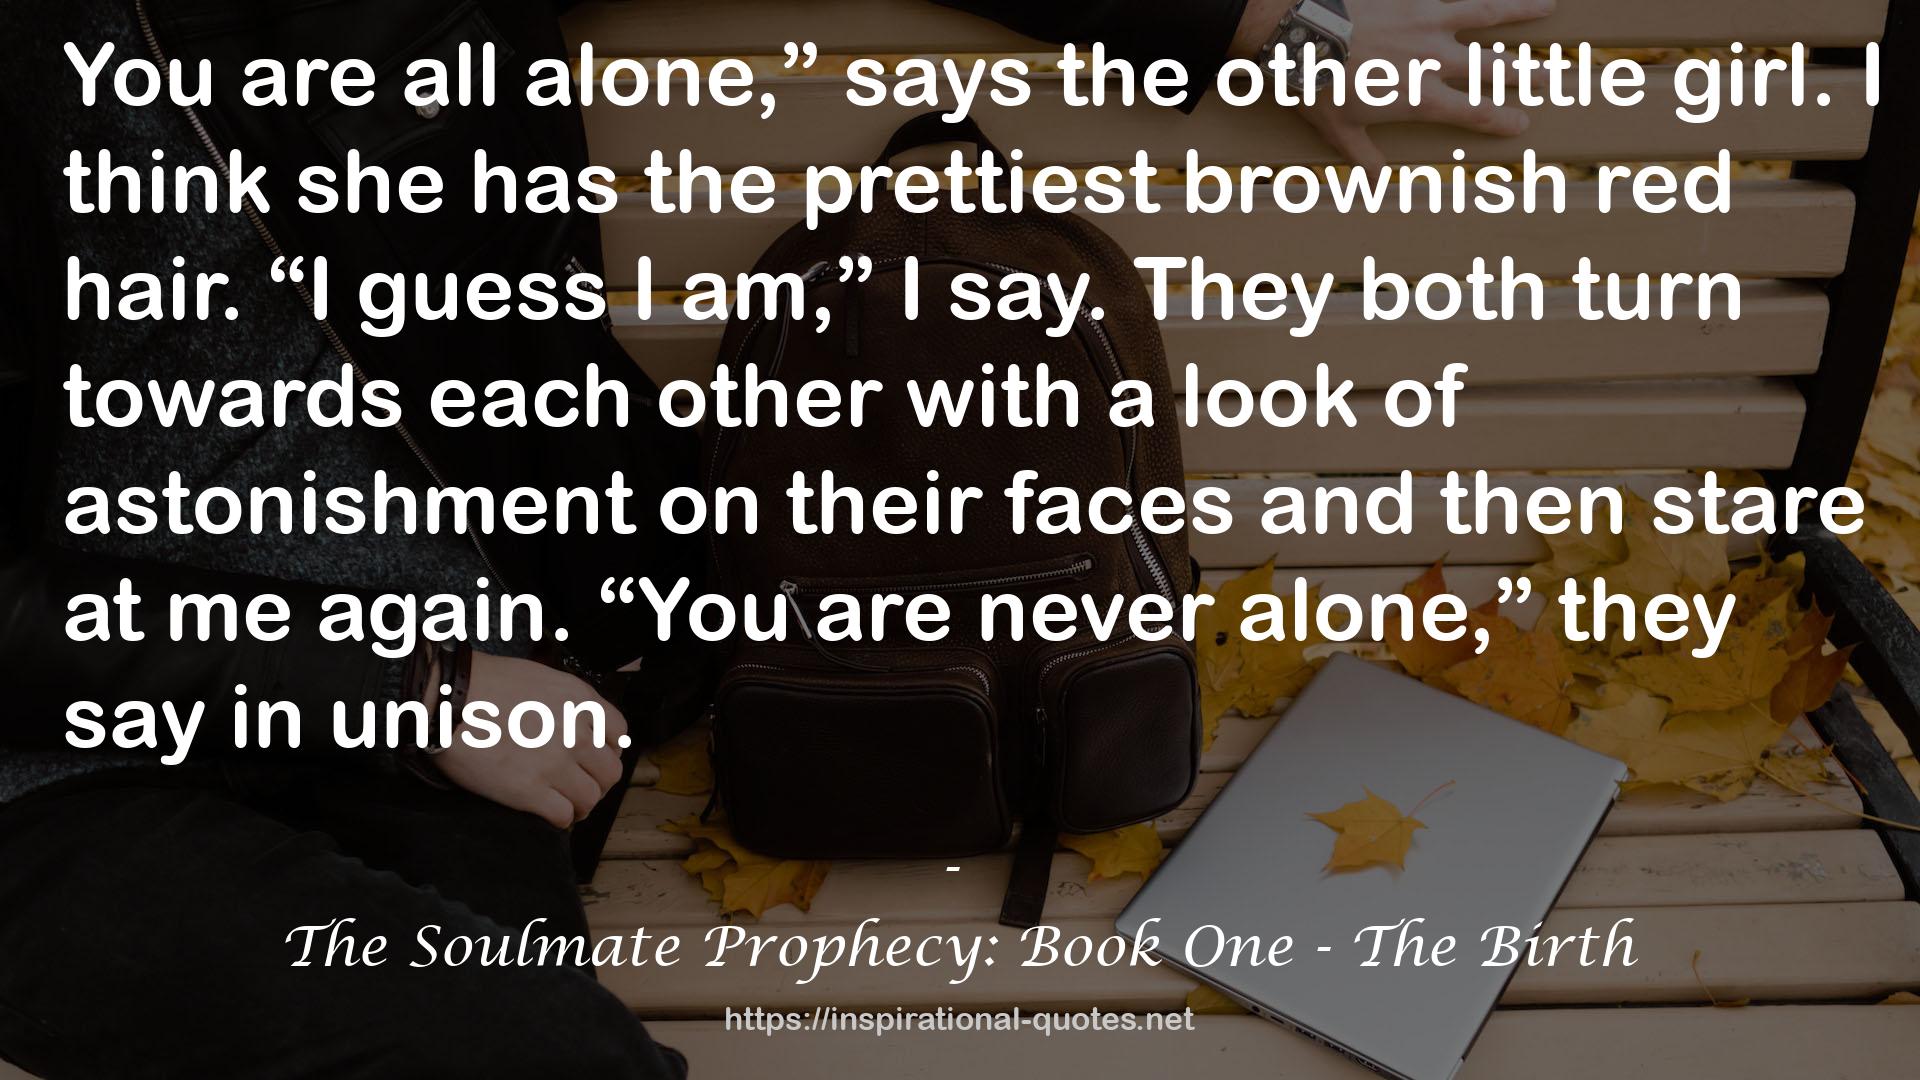 The Soulmate Prophecy: Book One - The Birth QUOTES